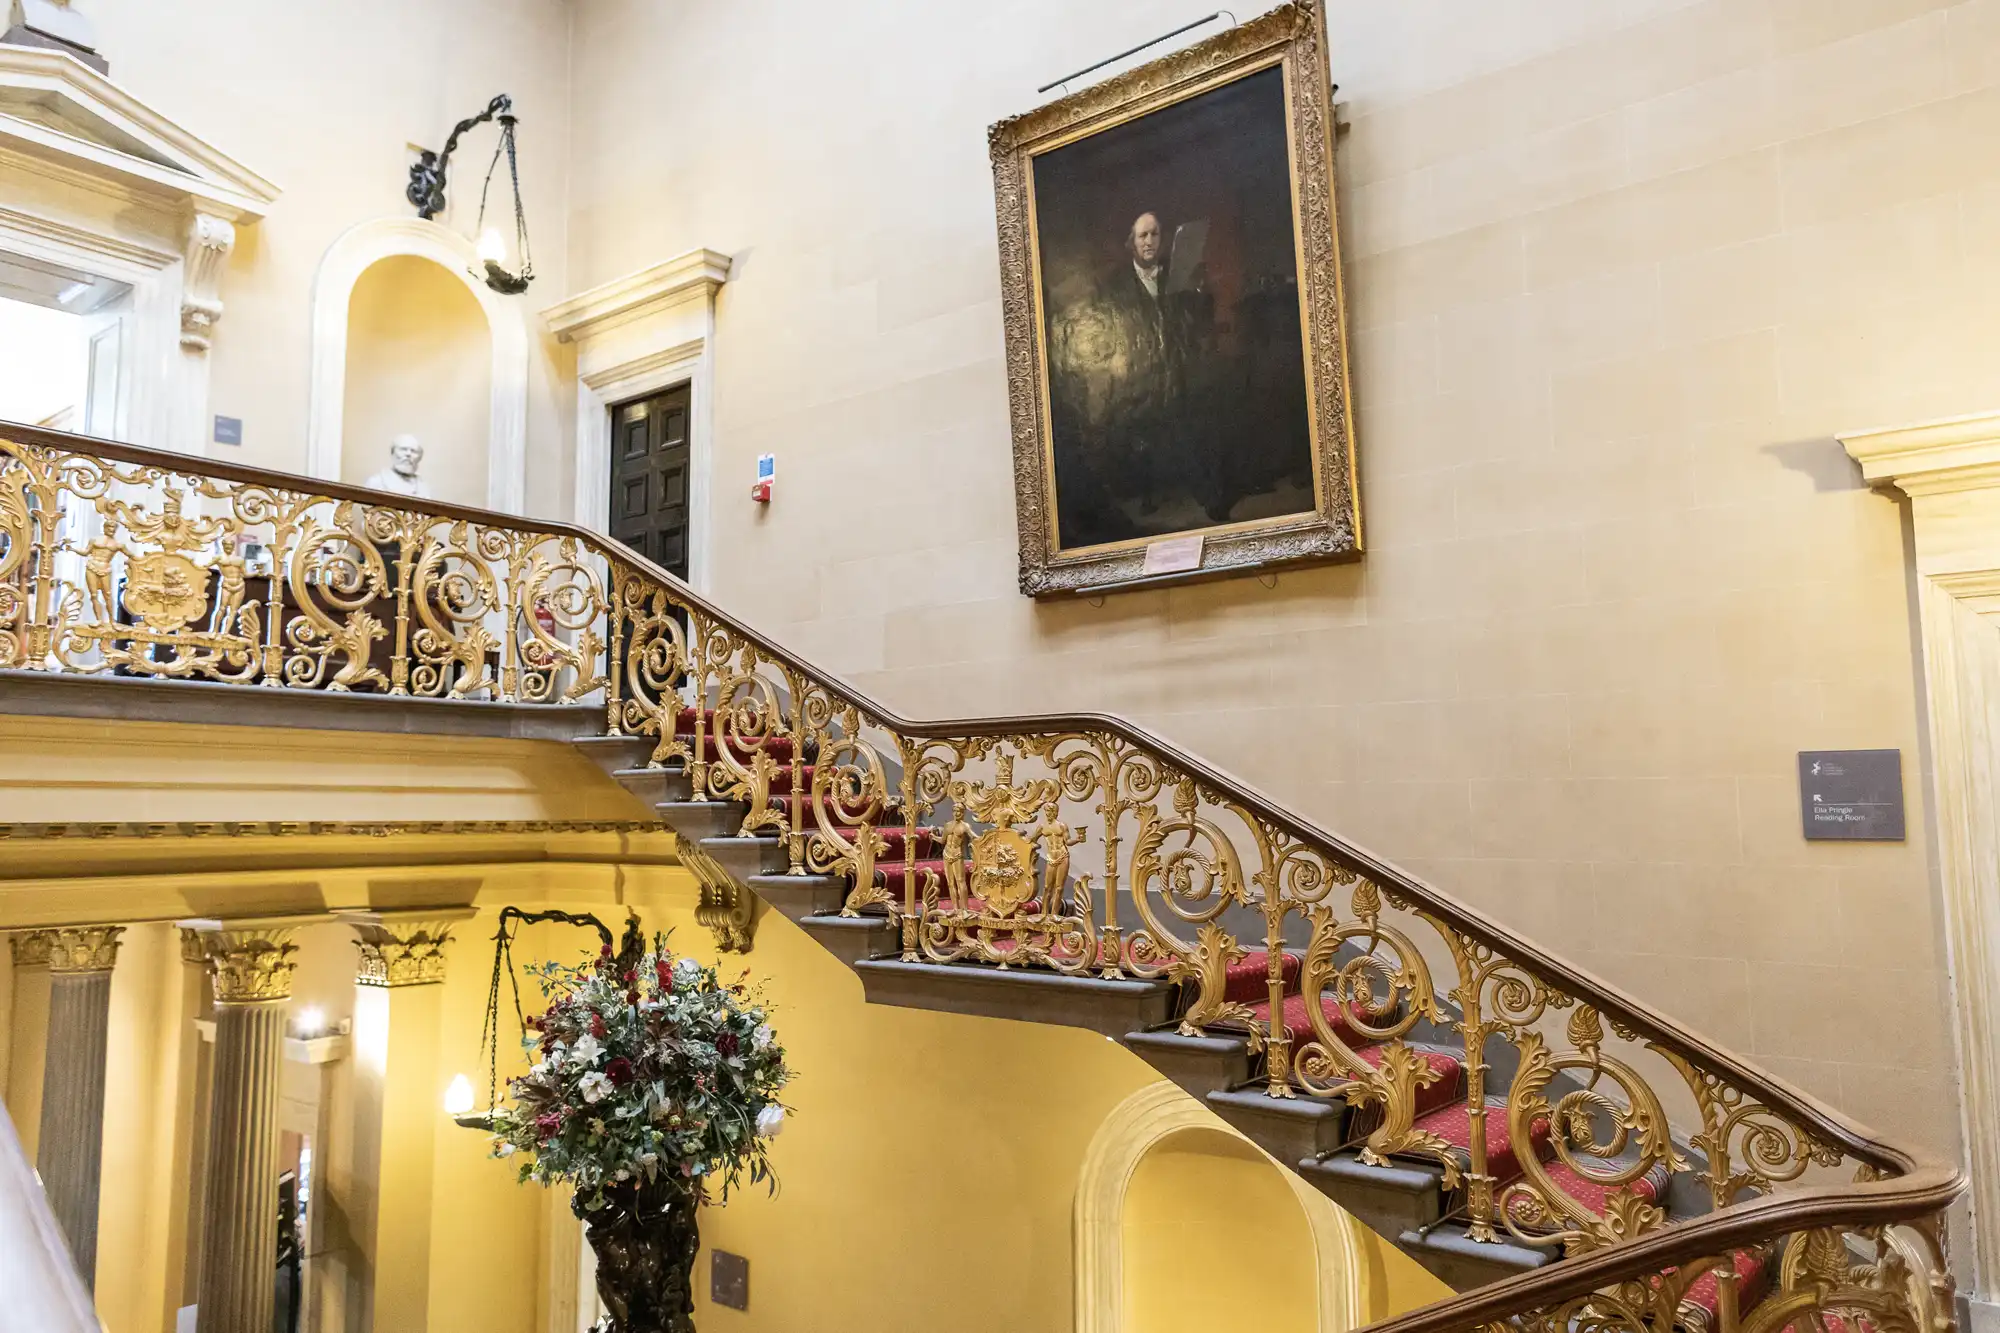 Photo of an ornate staircase with a gold railing and red carpeting in an old building. A large portrait hangs on the wall above the staircase, and a decorative floral arrangement sits by the stairs.